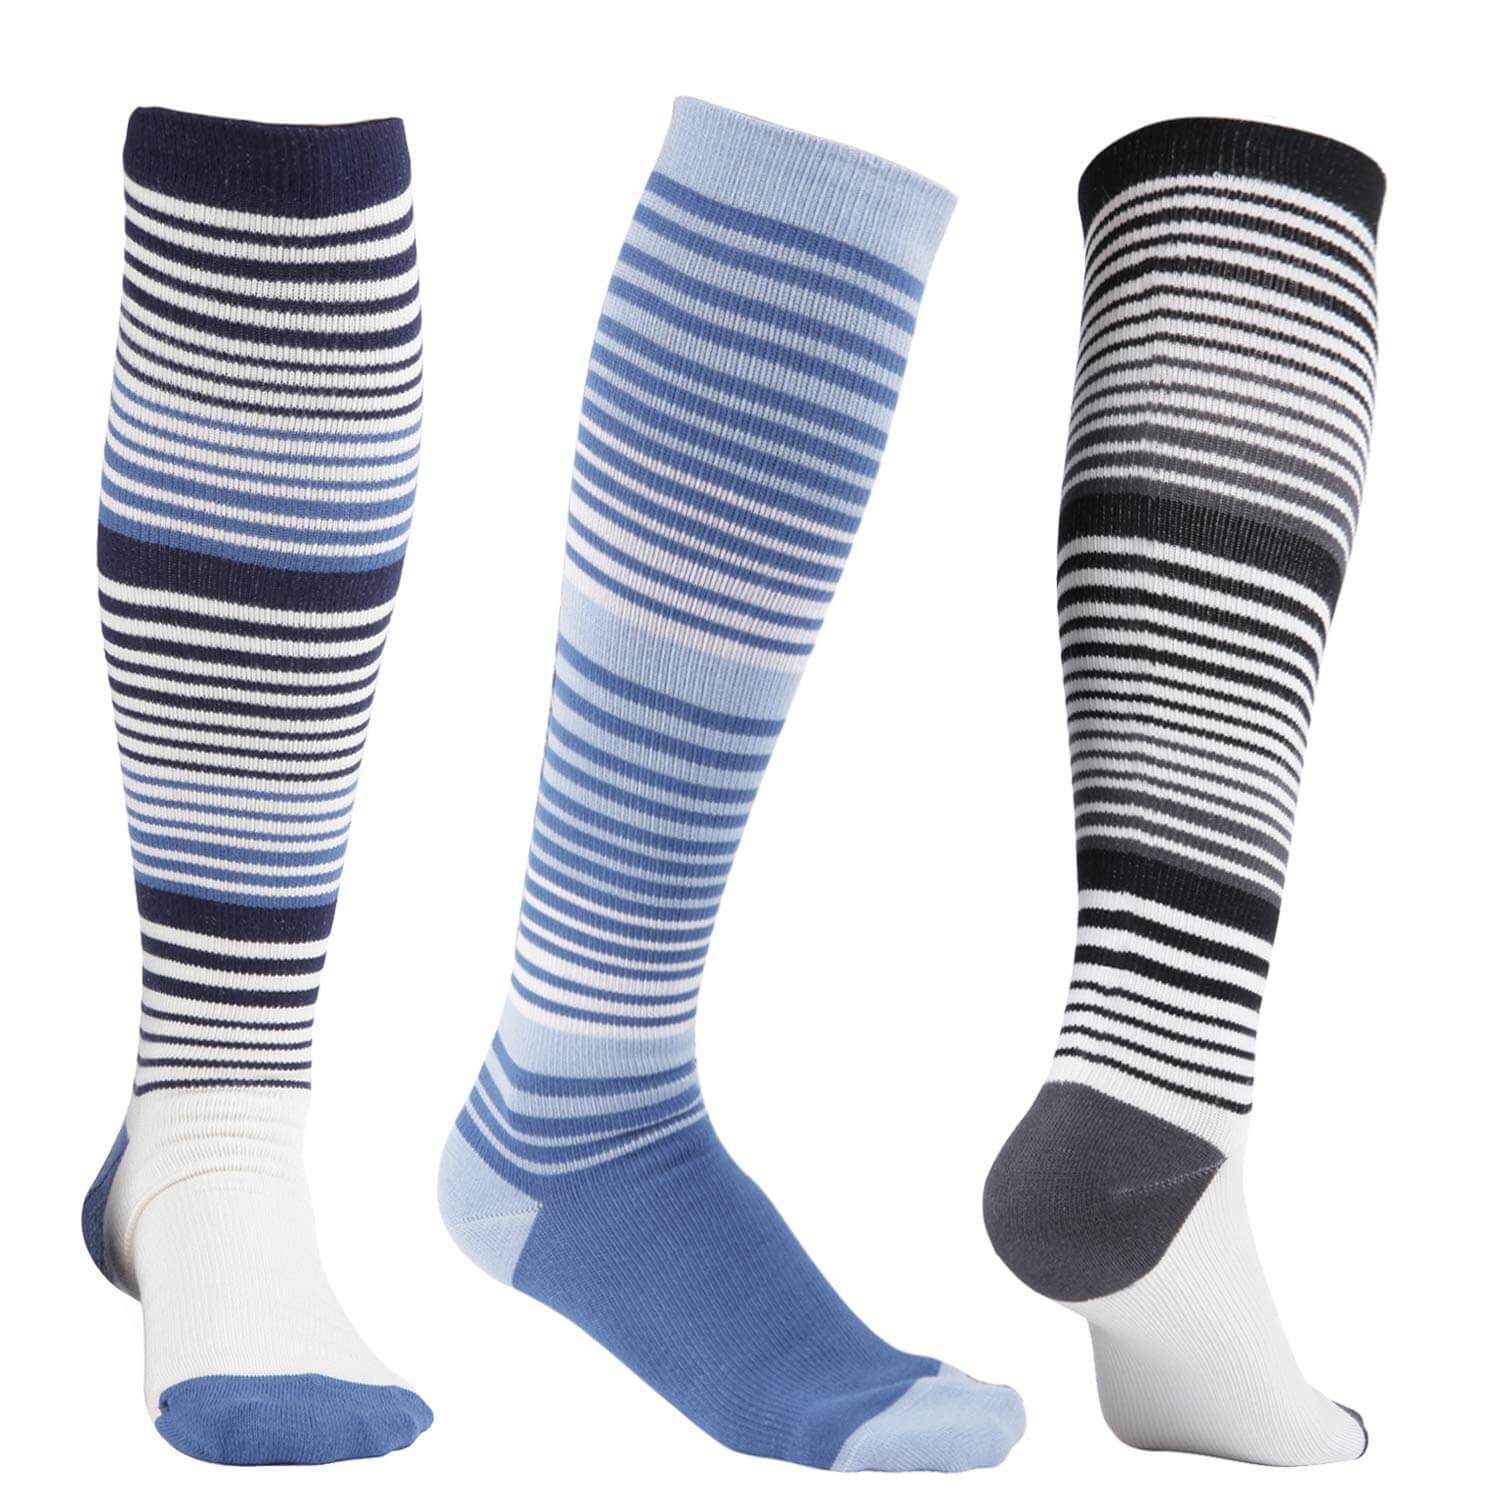 Unisex Premium Ultra Soft Bamboo Socks, 2 Pairs - Free-Shipping For Tr